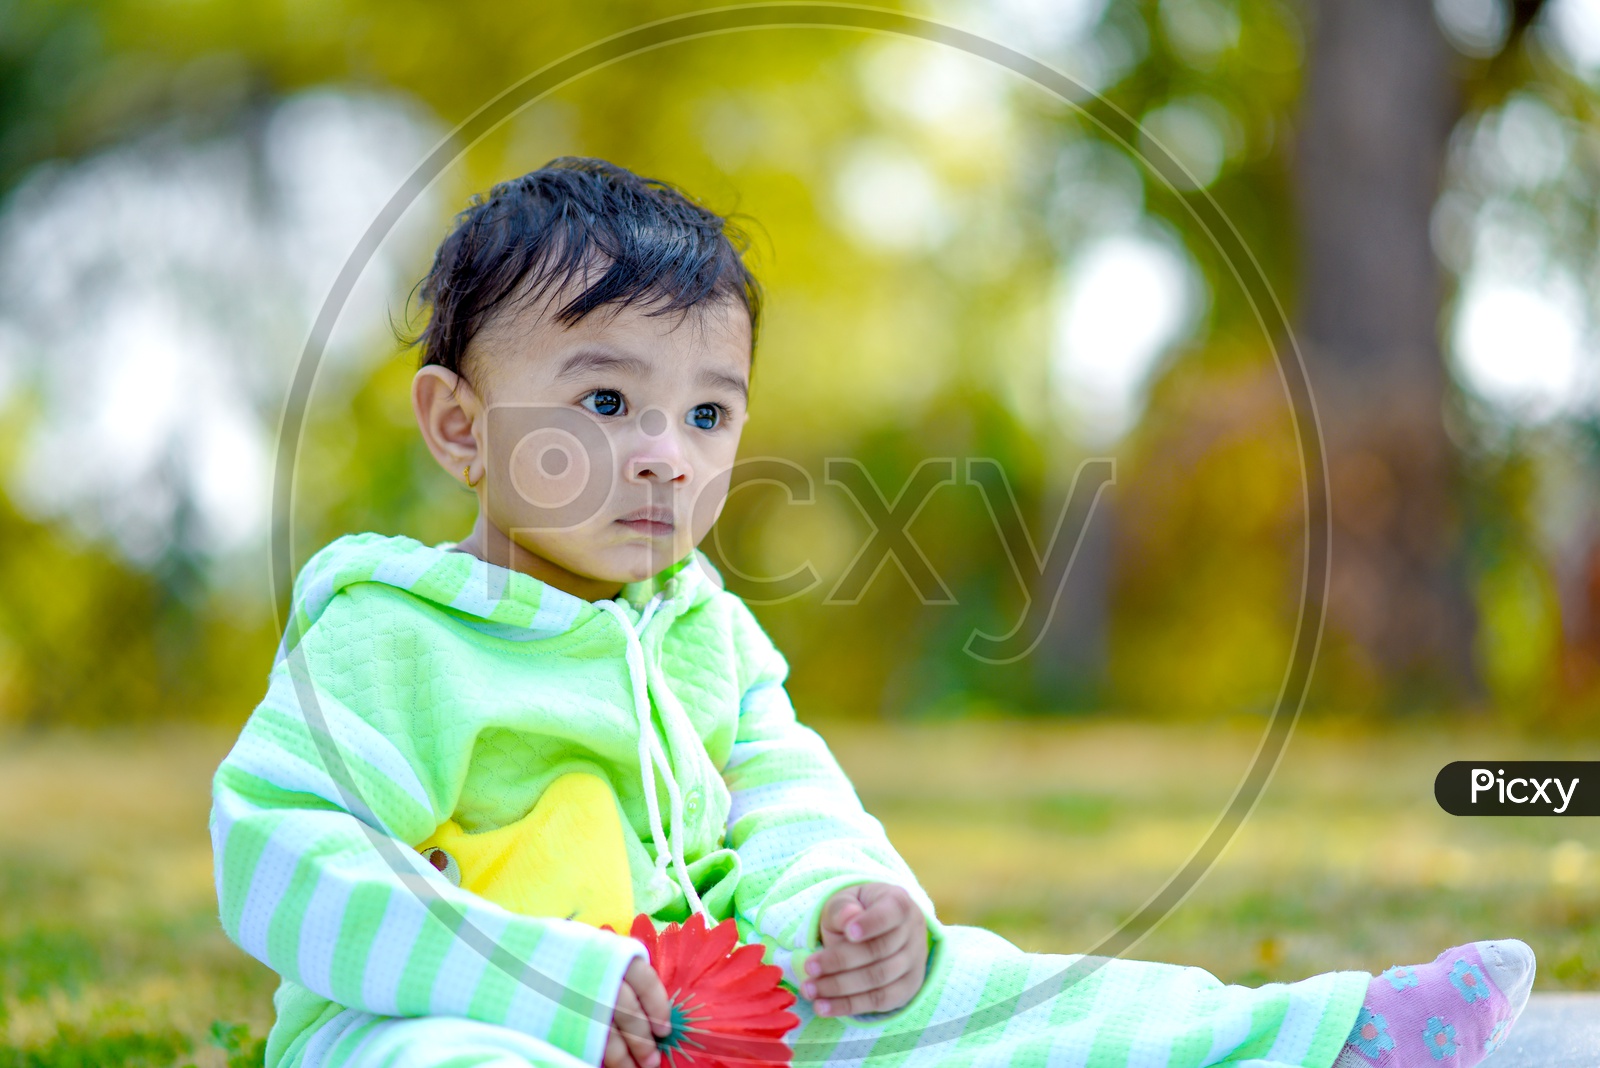 Indian Cute Baby Boy Closeup Shot with  Cute Expression